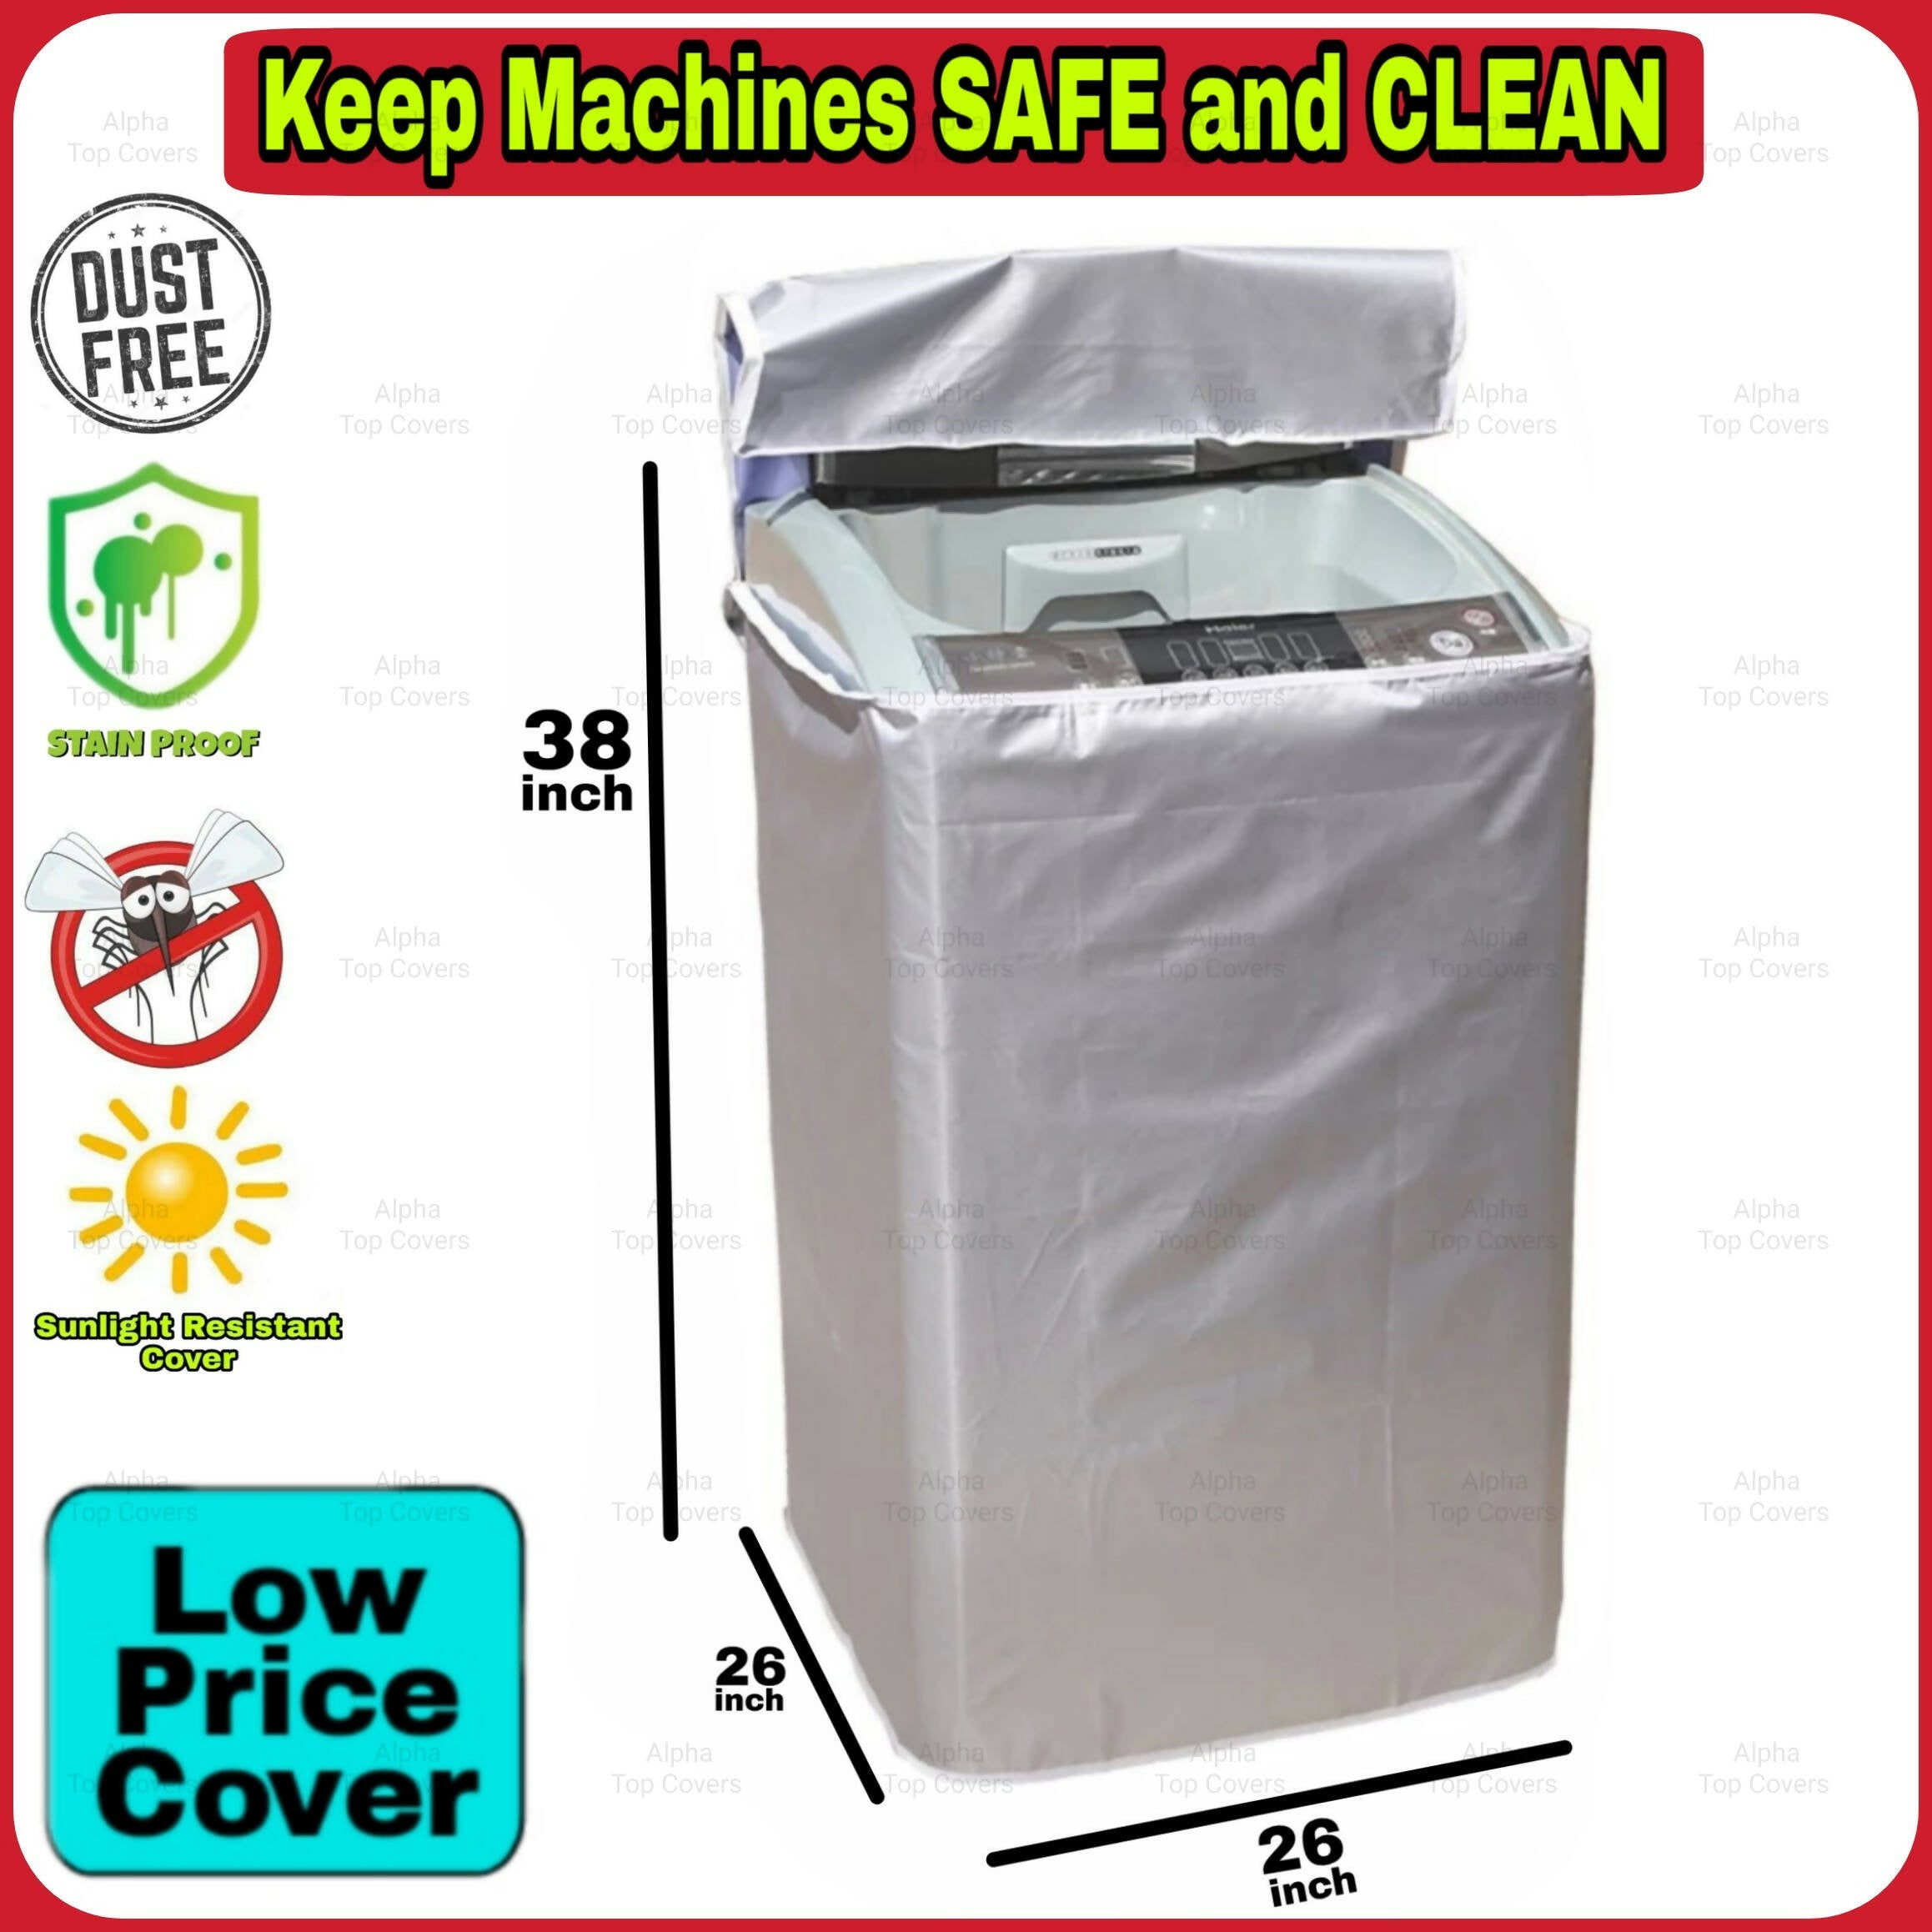 11kg to 15kg Washing Machine Cover By ALPHA